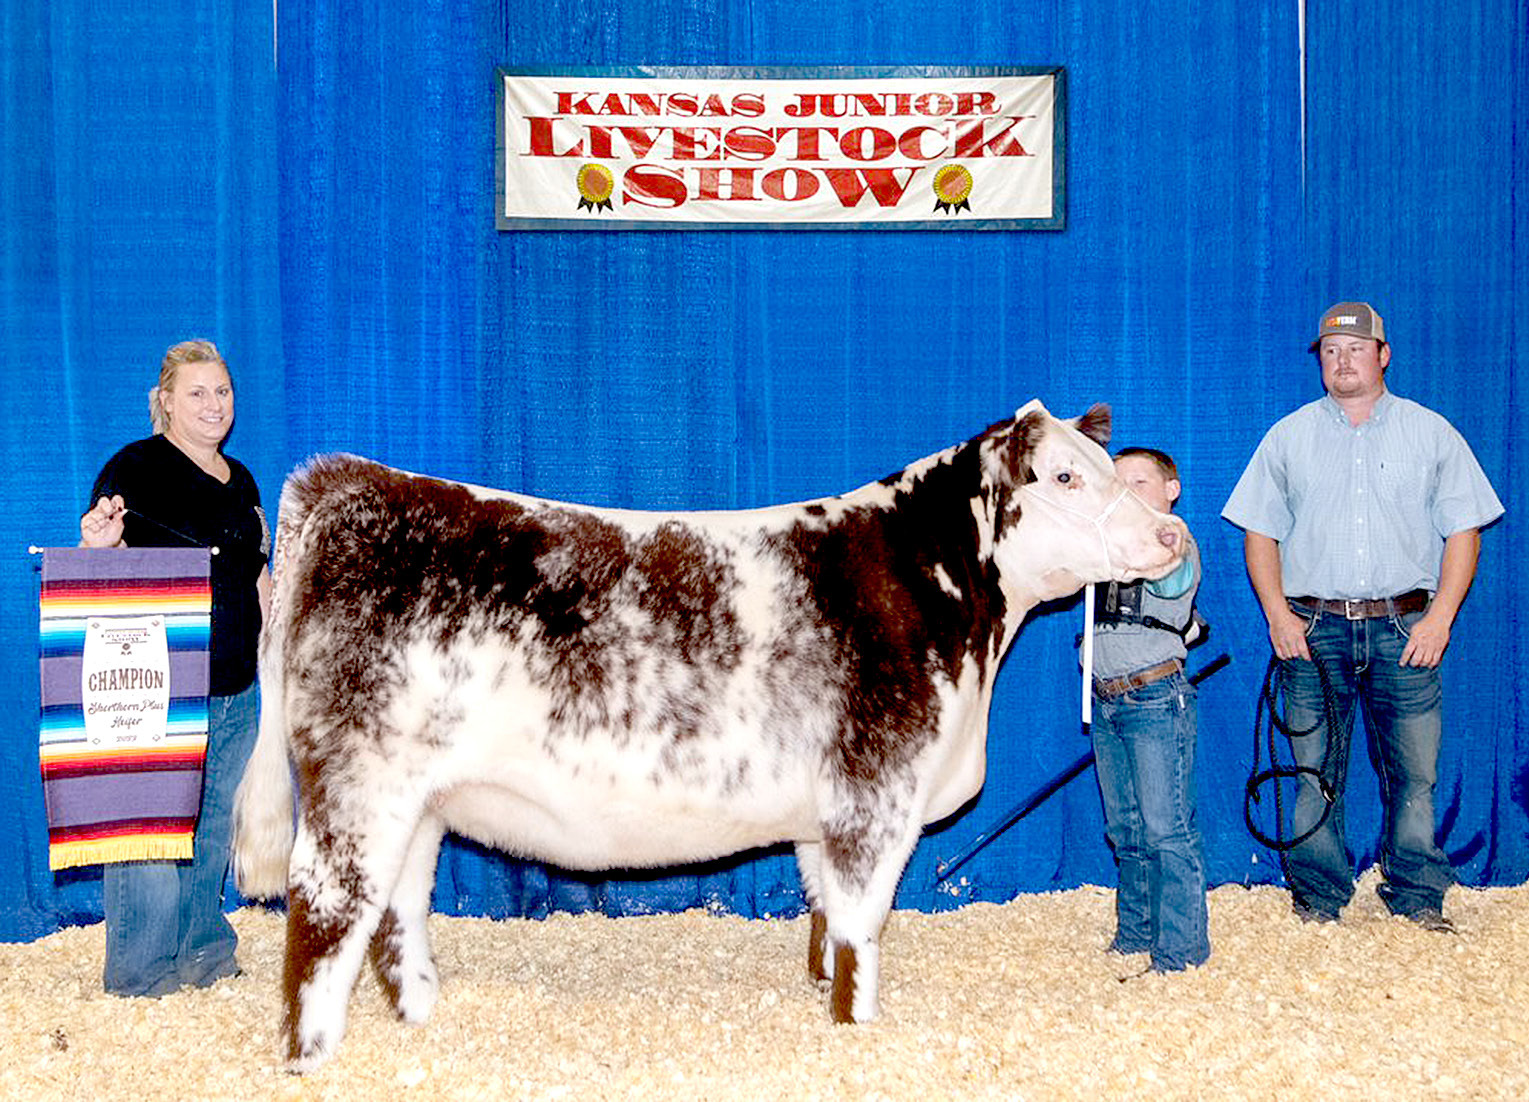 COLE FLOWER, in what was his first year competing at the Kansas Junior Livetock Show, brought home the Champion Shorthorn Heifer. Also shown with Cole are his proud parents, Courtney Hrabe, left, and Logan Flower, right.